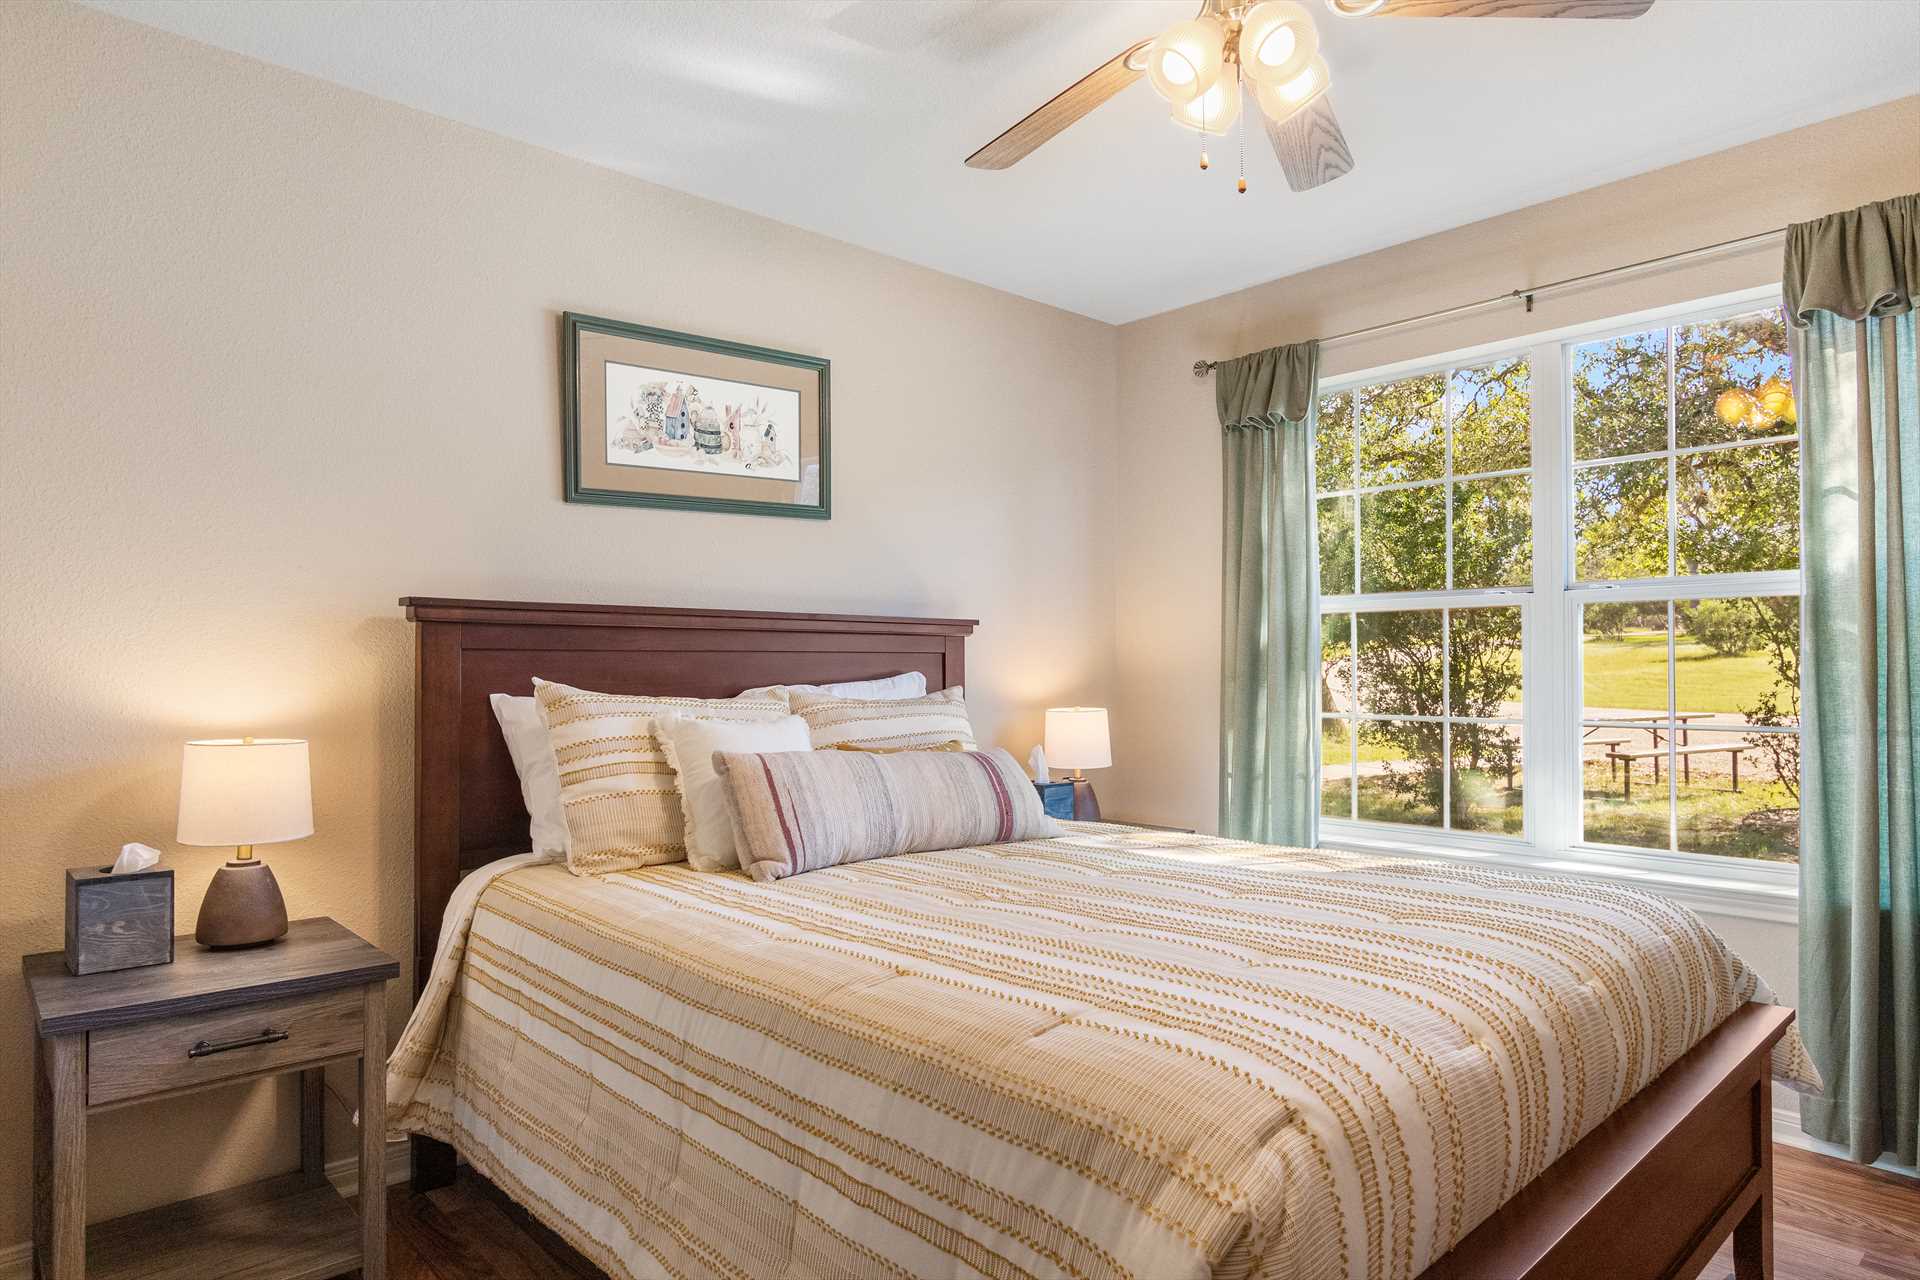                                                 The third bedroom has a queen-sized bed, and all bedrooms have windows to let in natural light, and ceiling fans for added comfort.